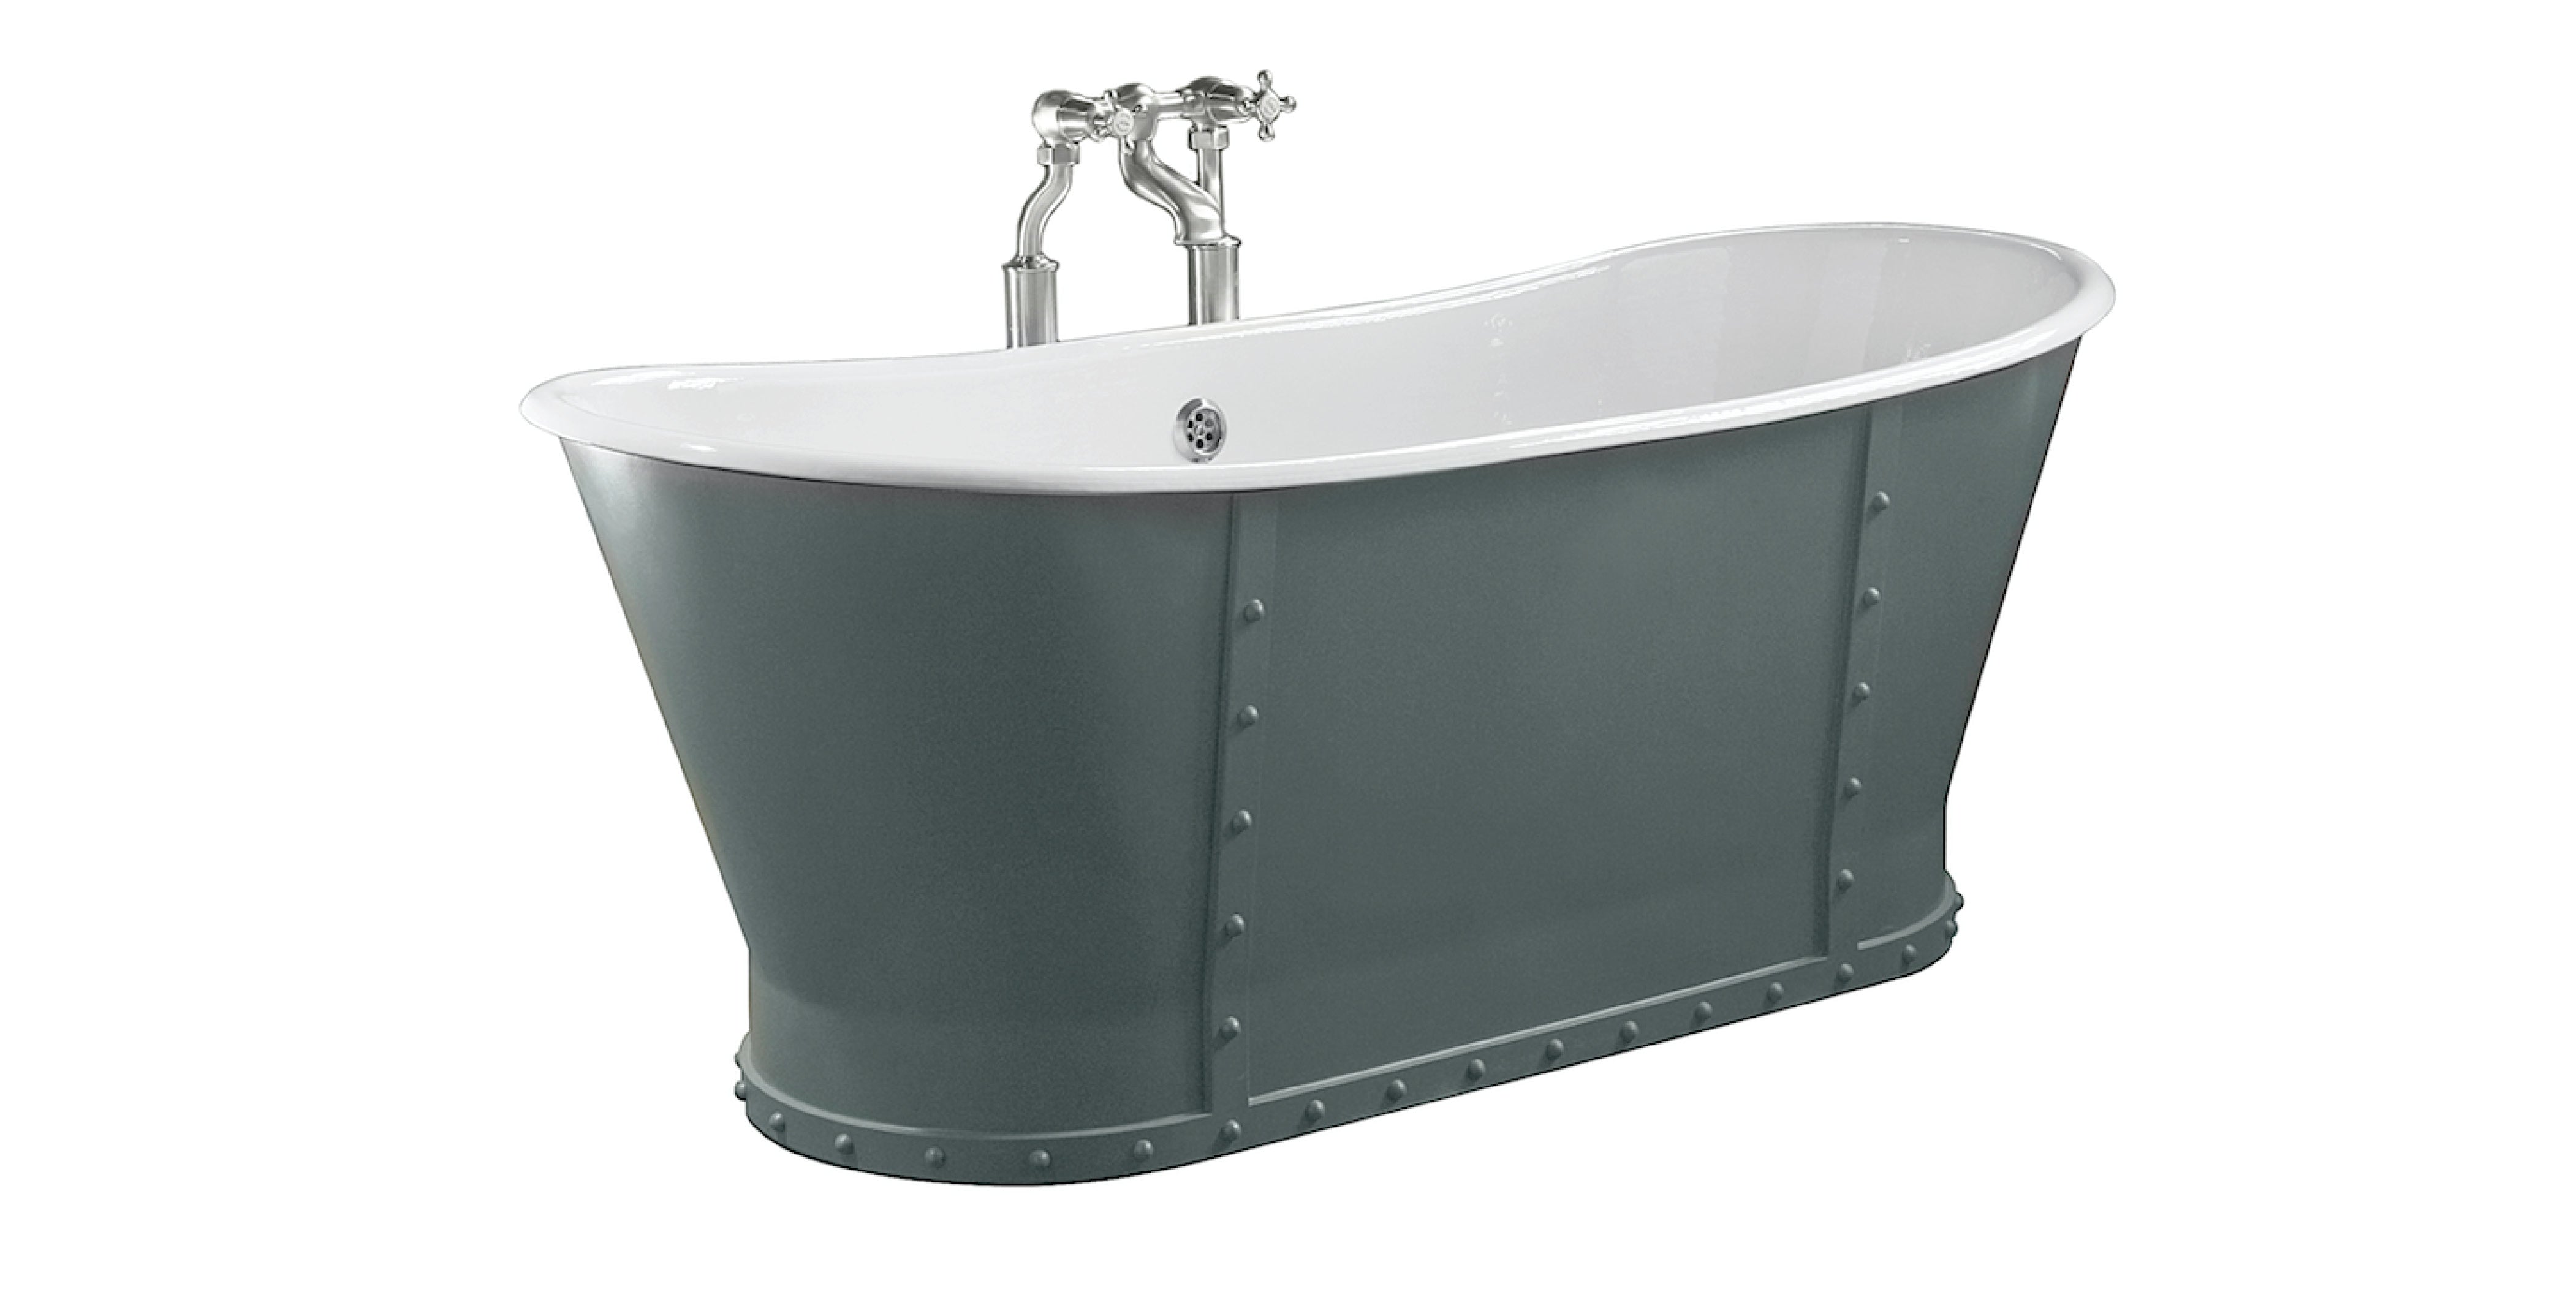 industrial style bath with rivet detail from aston matthews